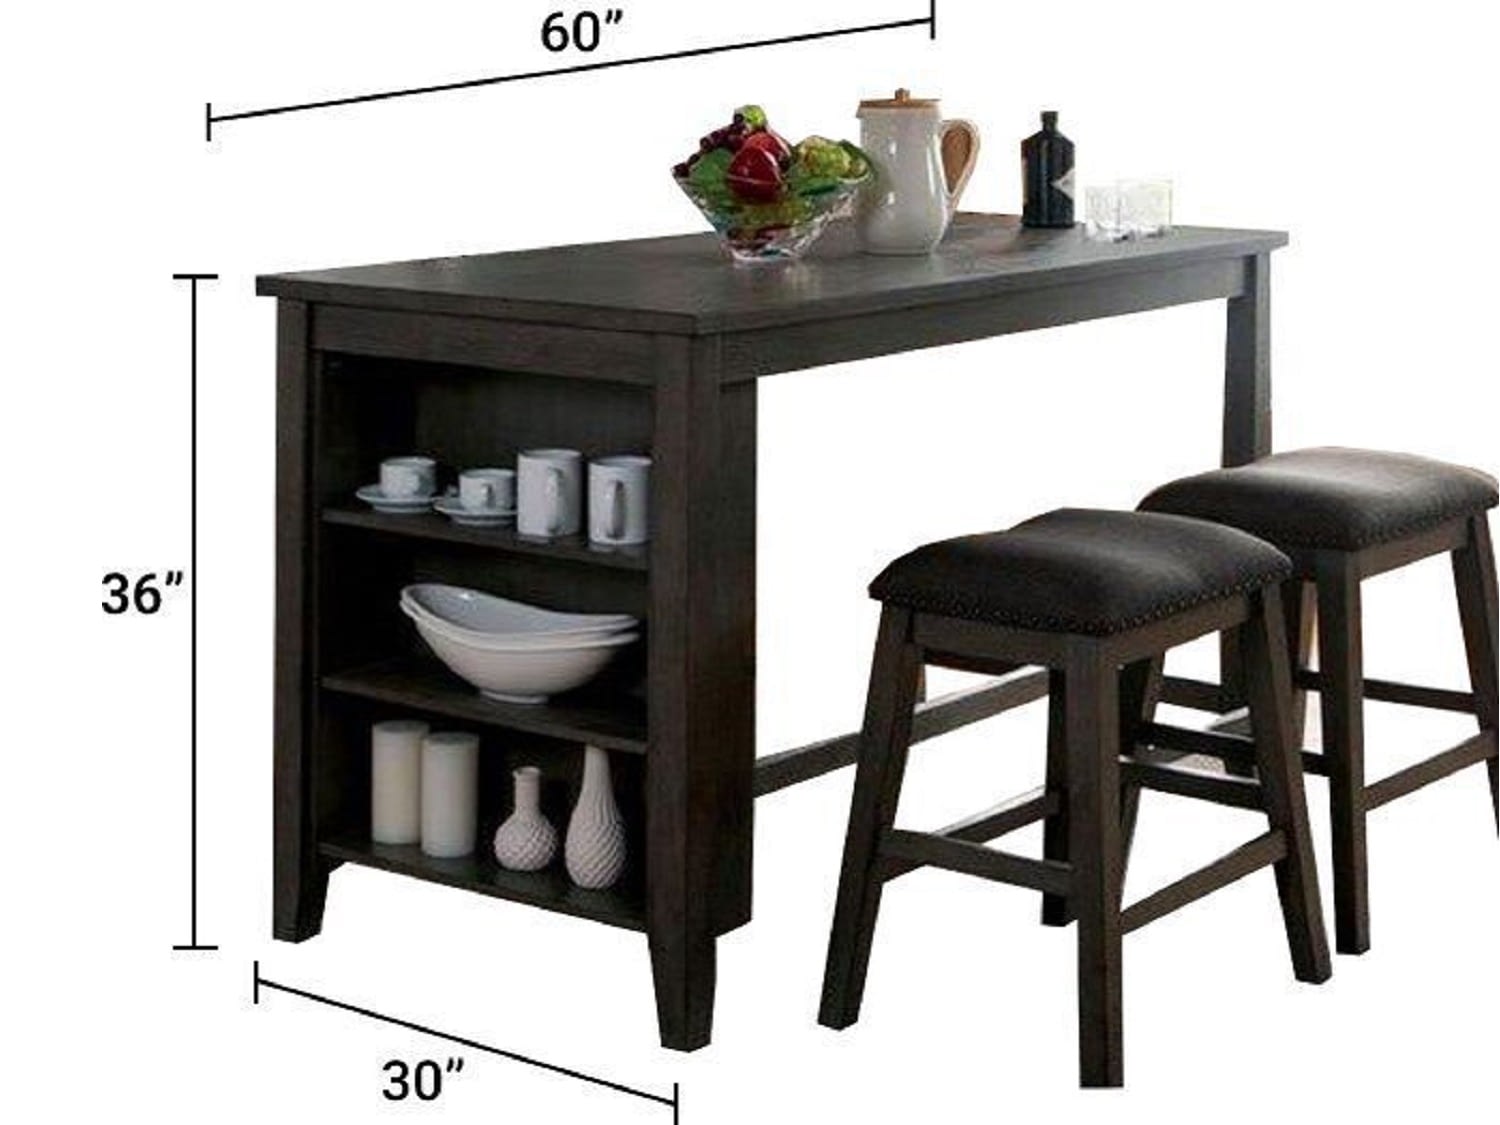 CARROLL Counter-Height Dining Table - Dimensions